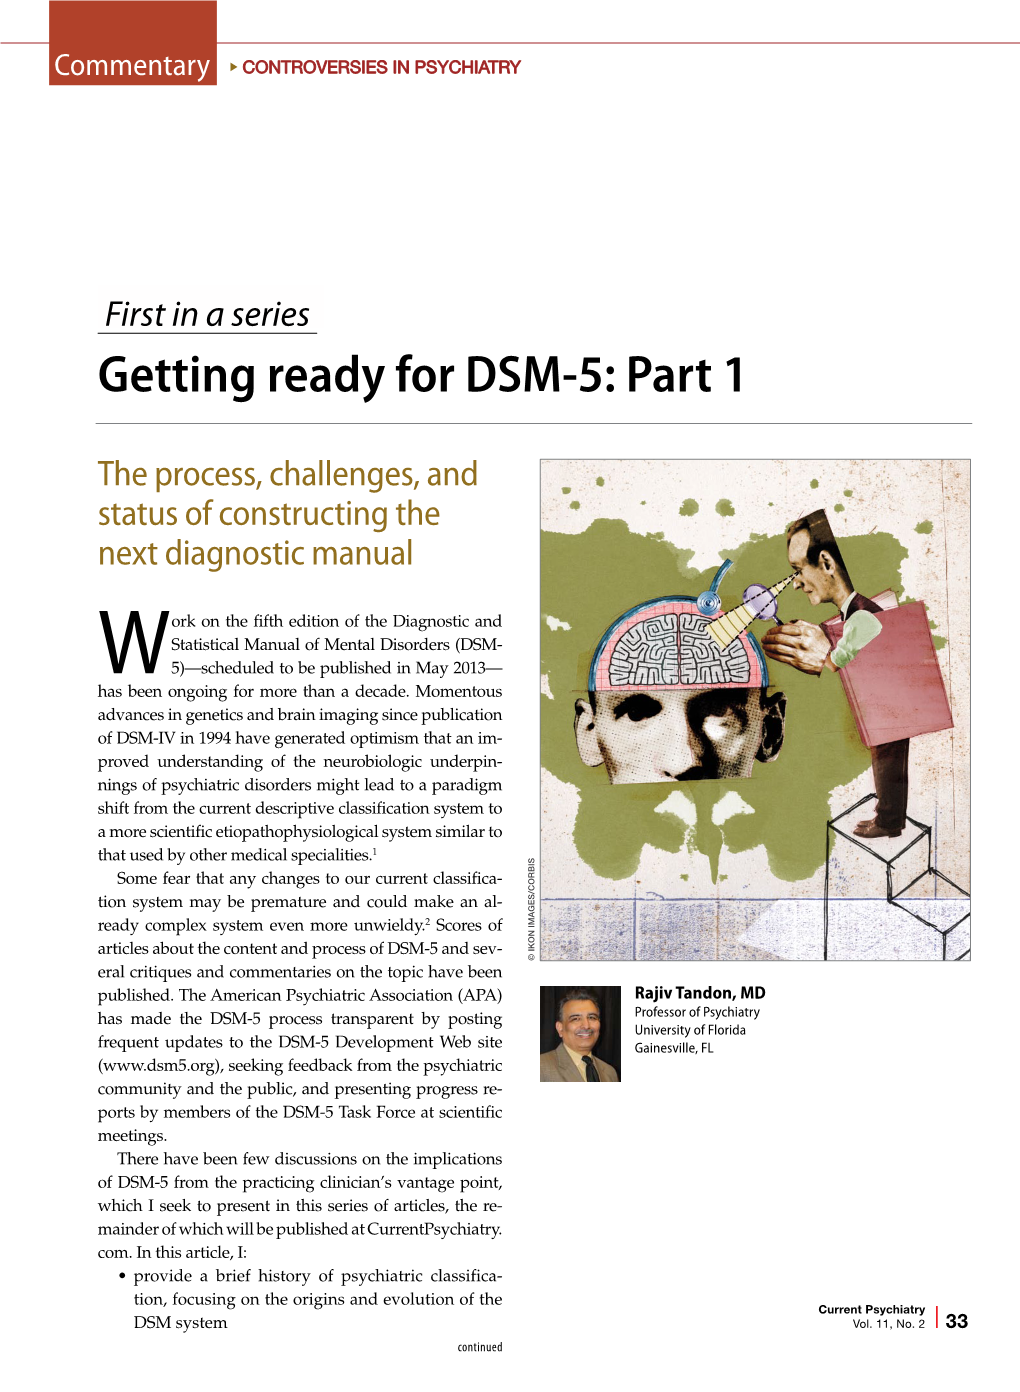 Getting Ready for DSM-5: Part 1